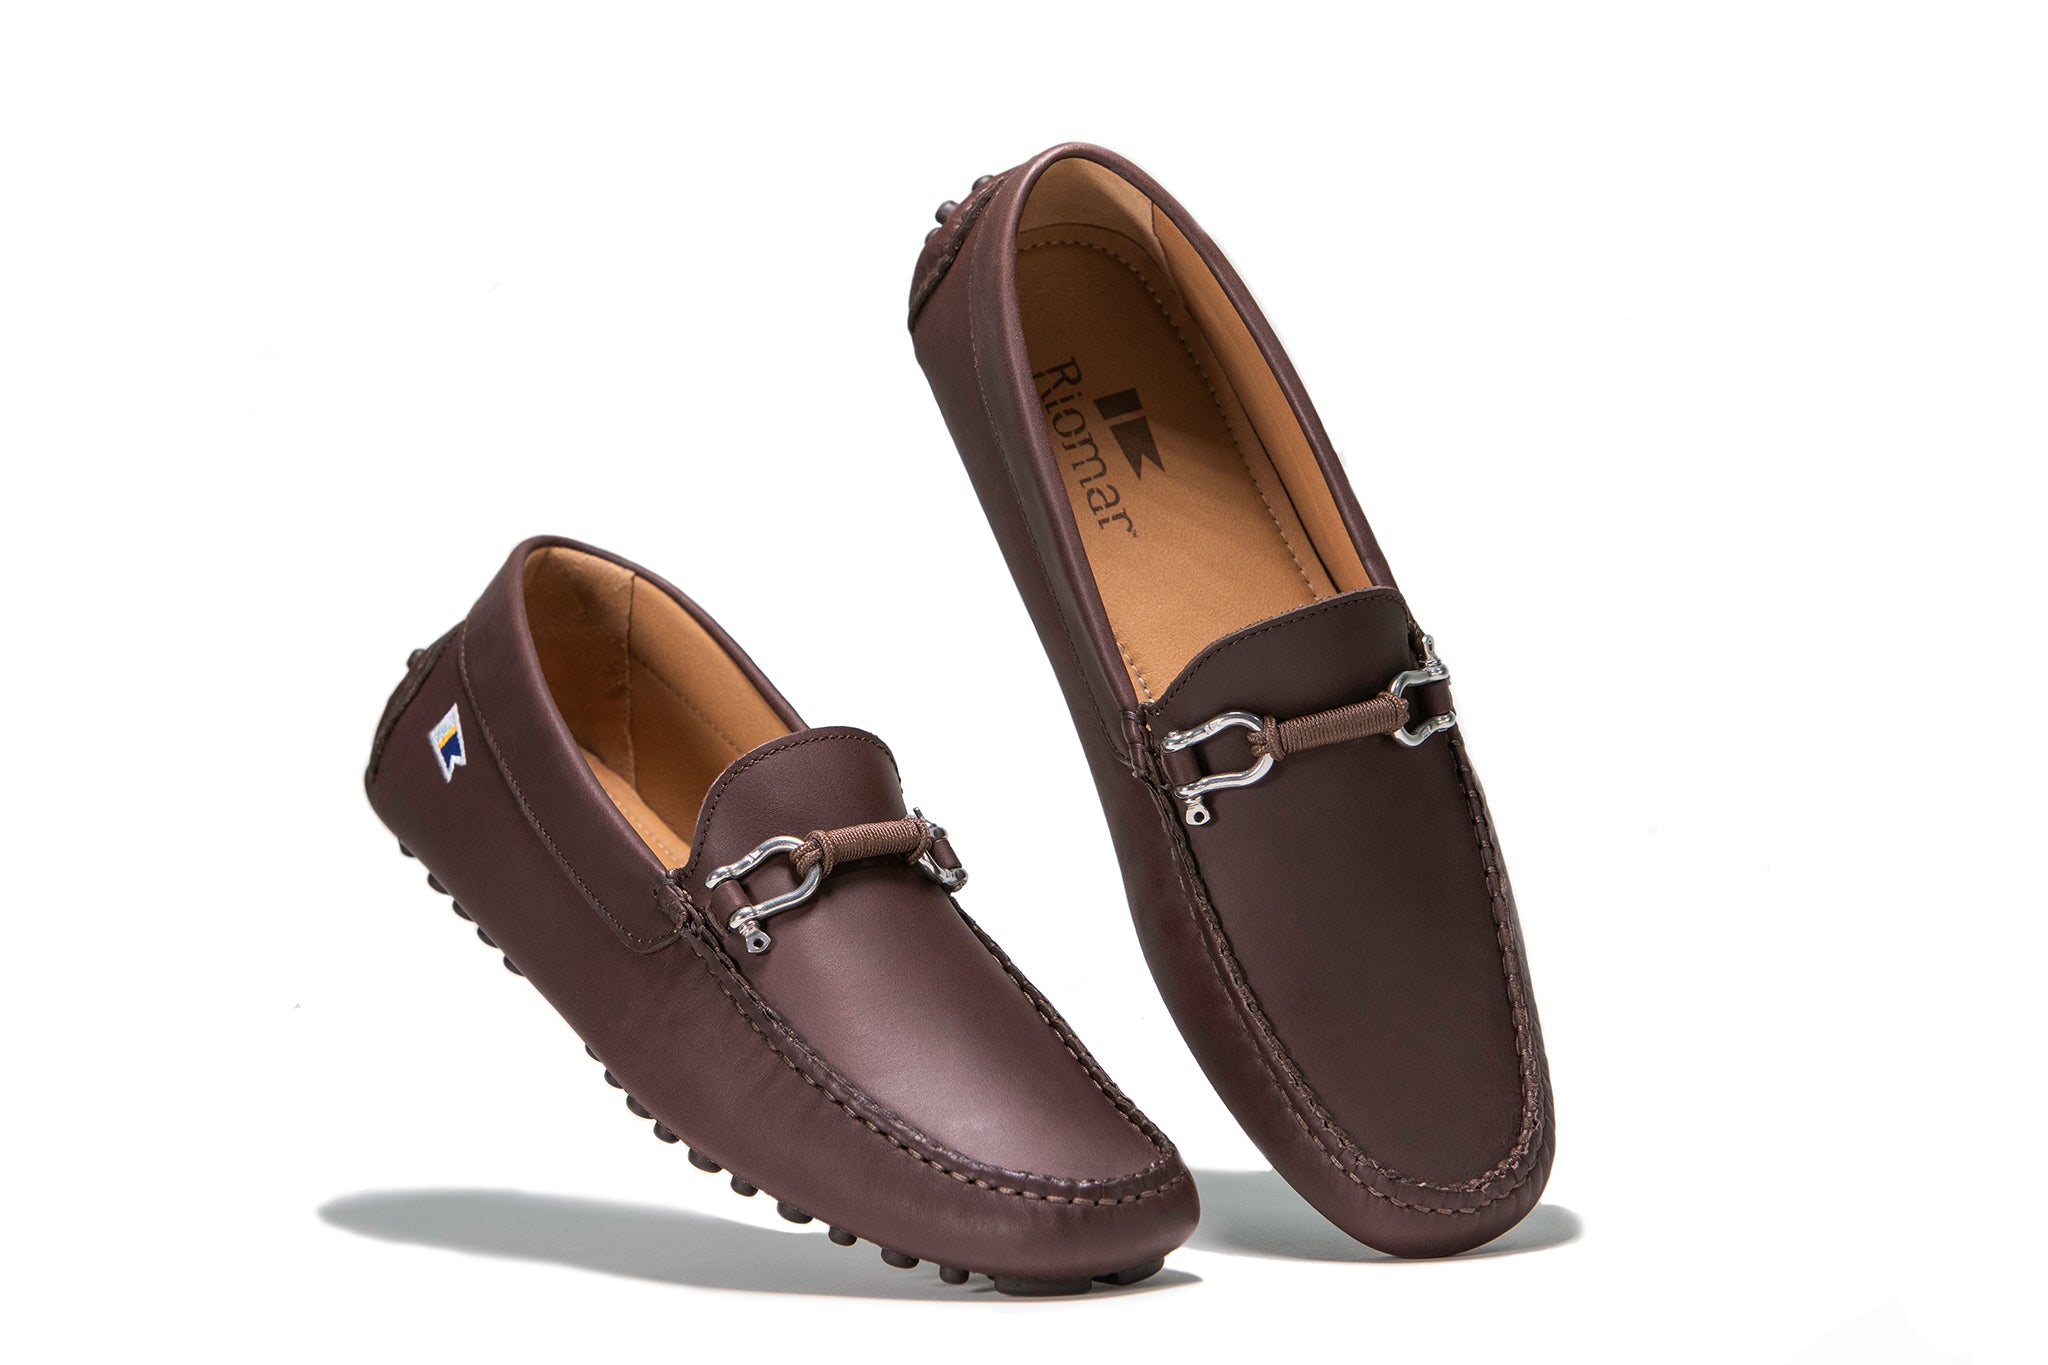 Riomar Reversible Leather Boat Shoes